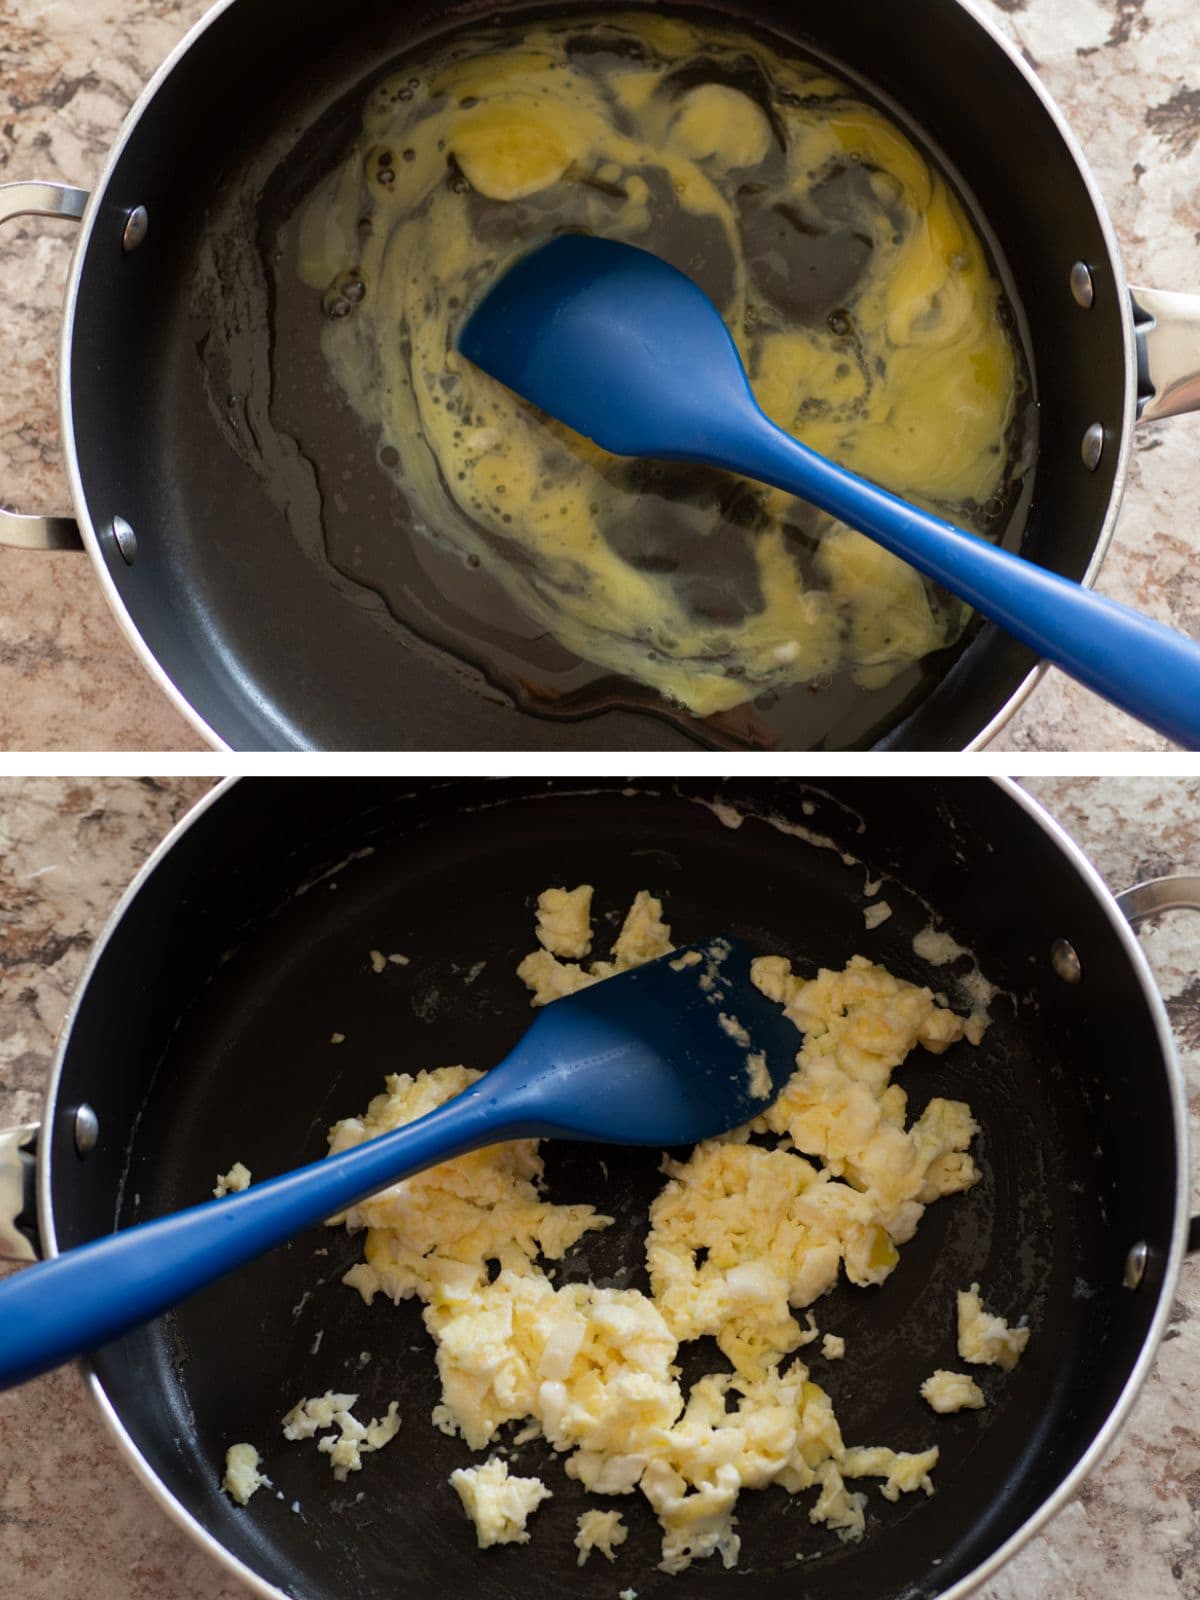 Egg scrambled in a large frying pan.